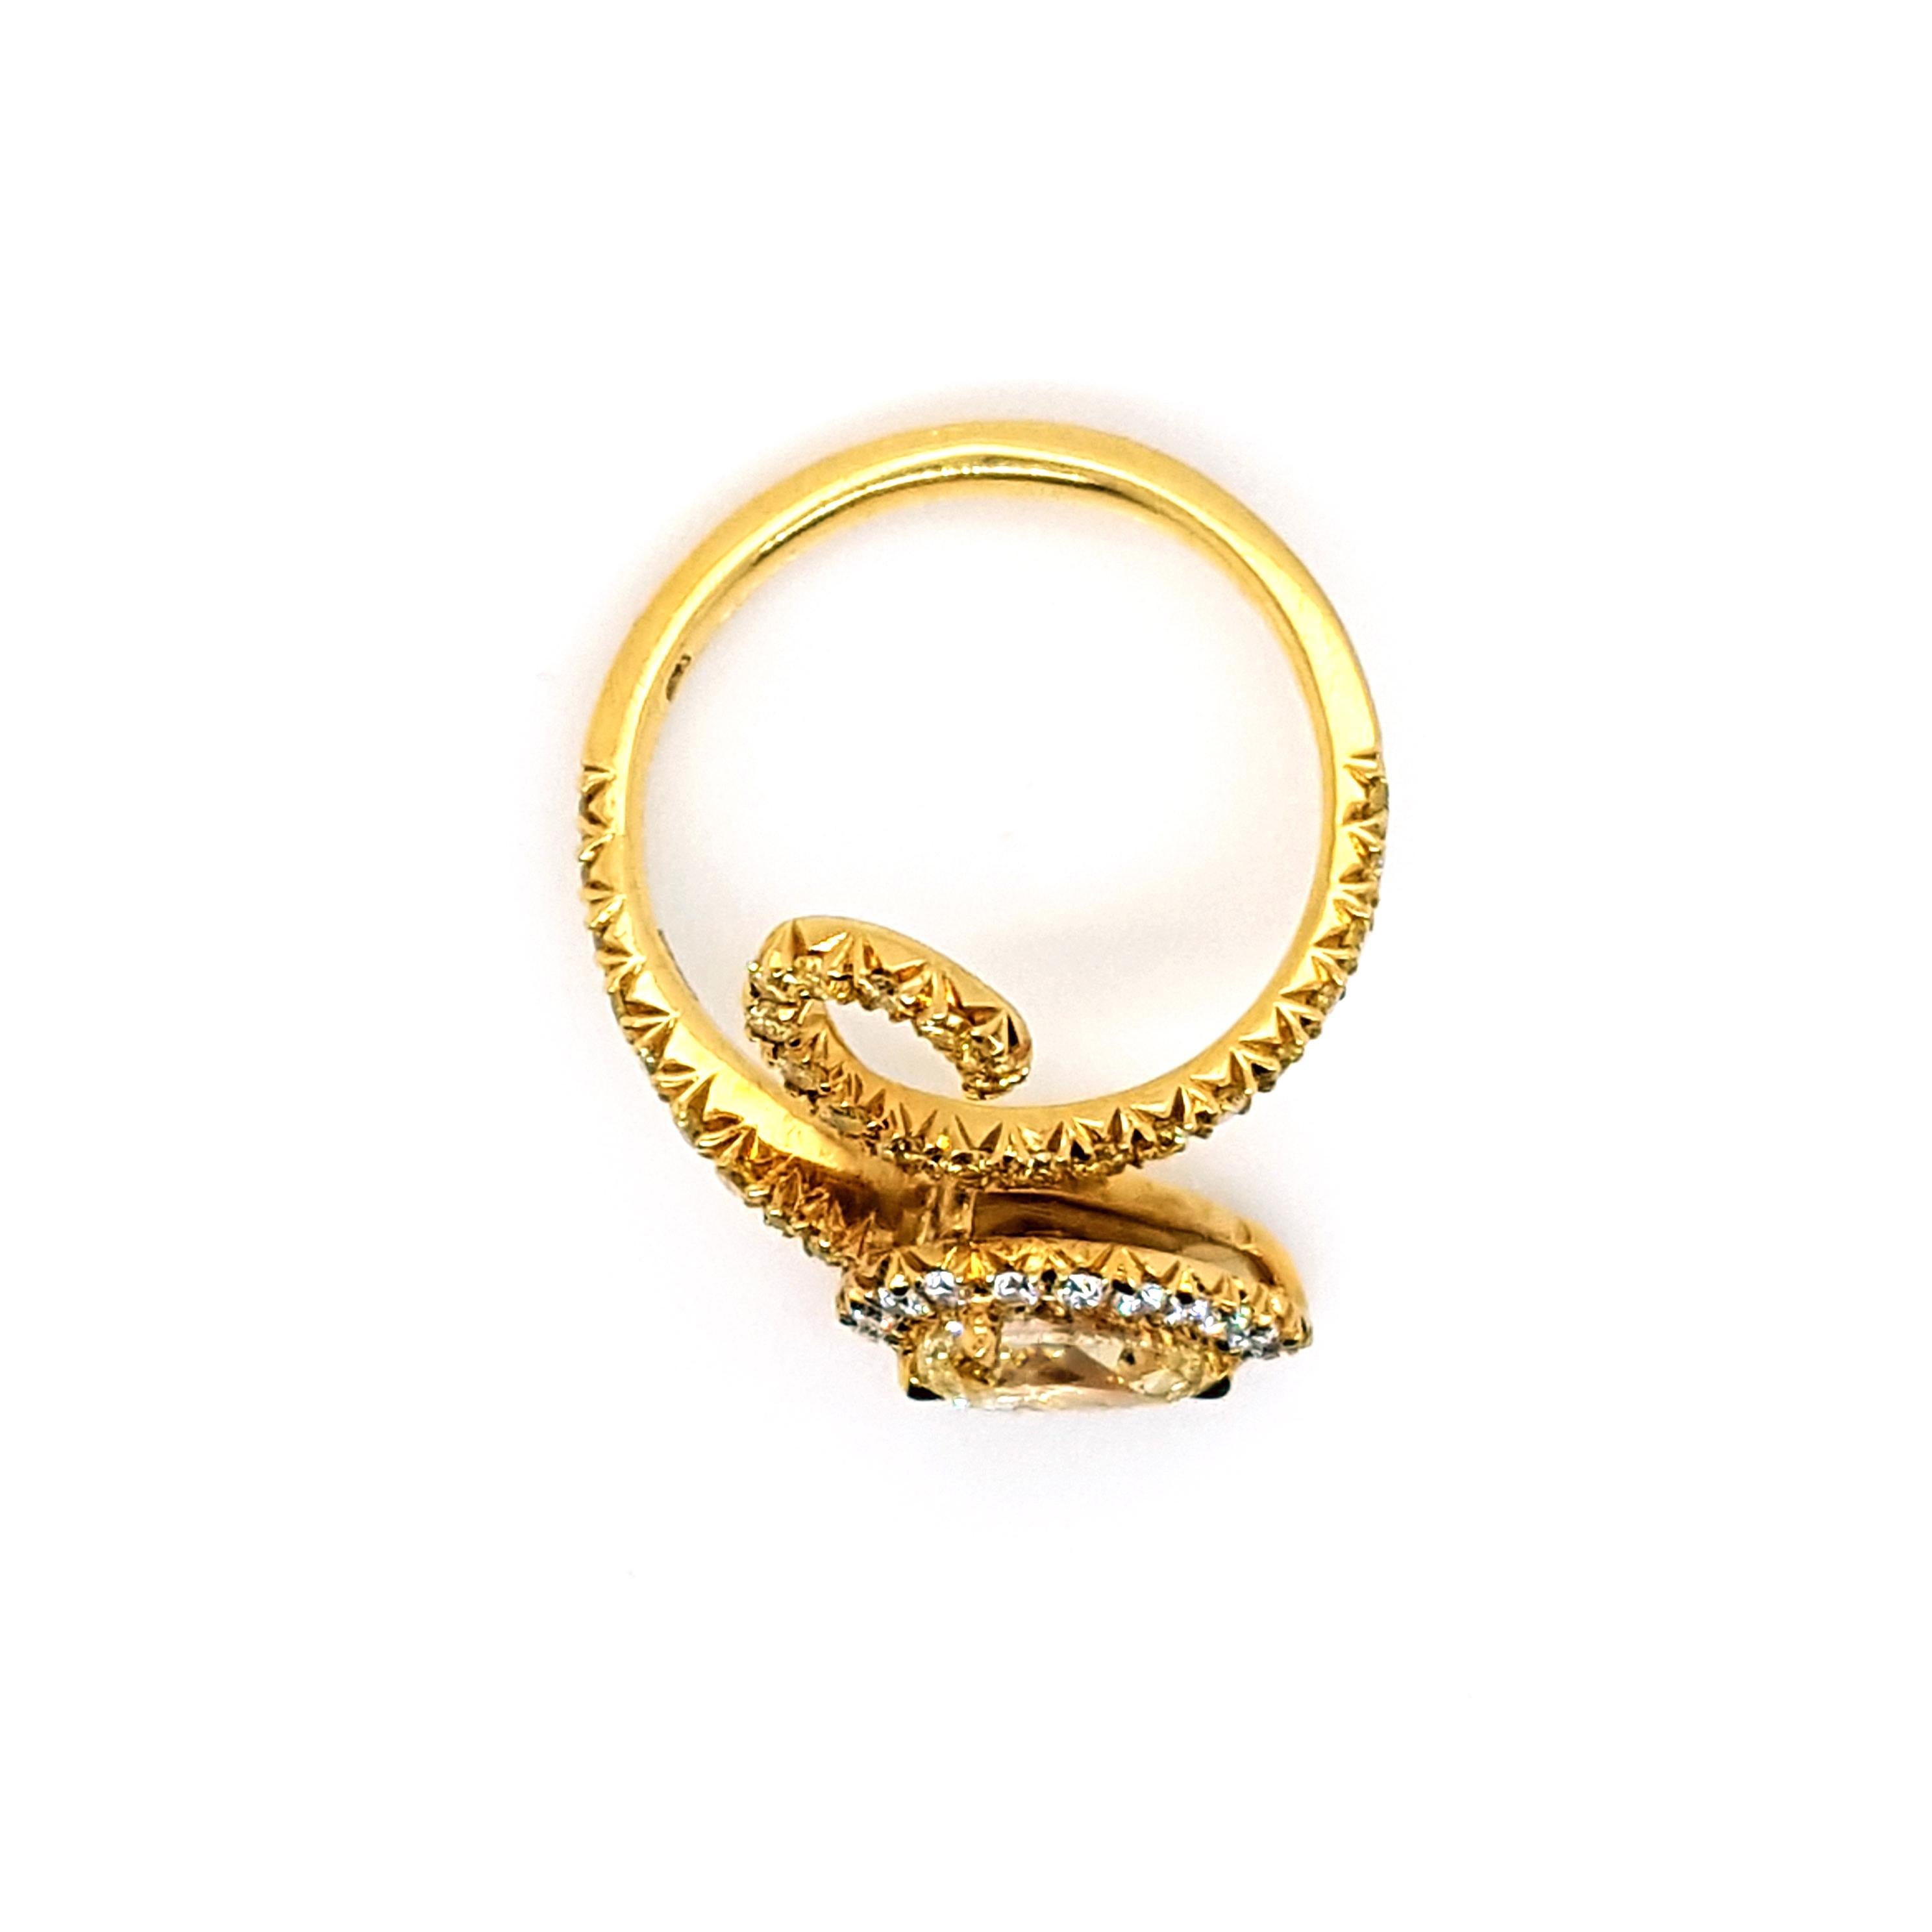 Art Nouveau 1.50 Carat Fancy Yellow Diamond and Pave’ diamonds Cocktail Ring, GIA Certified. For Sale